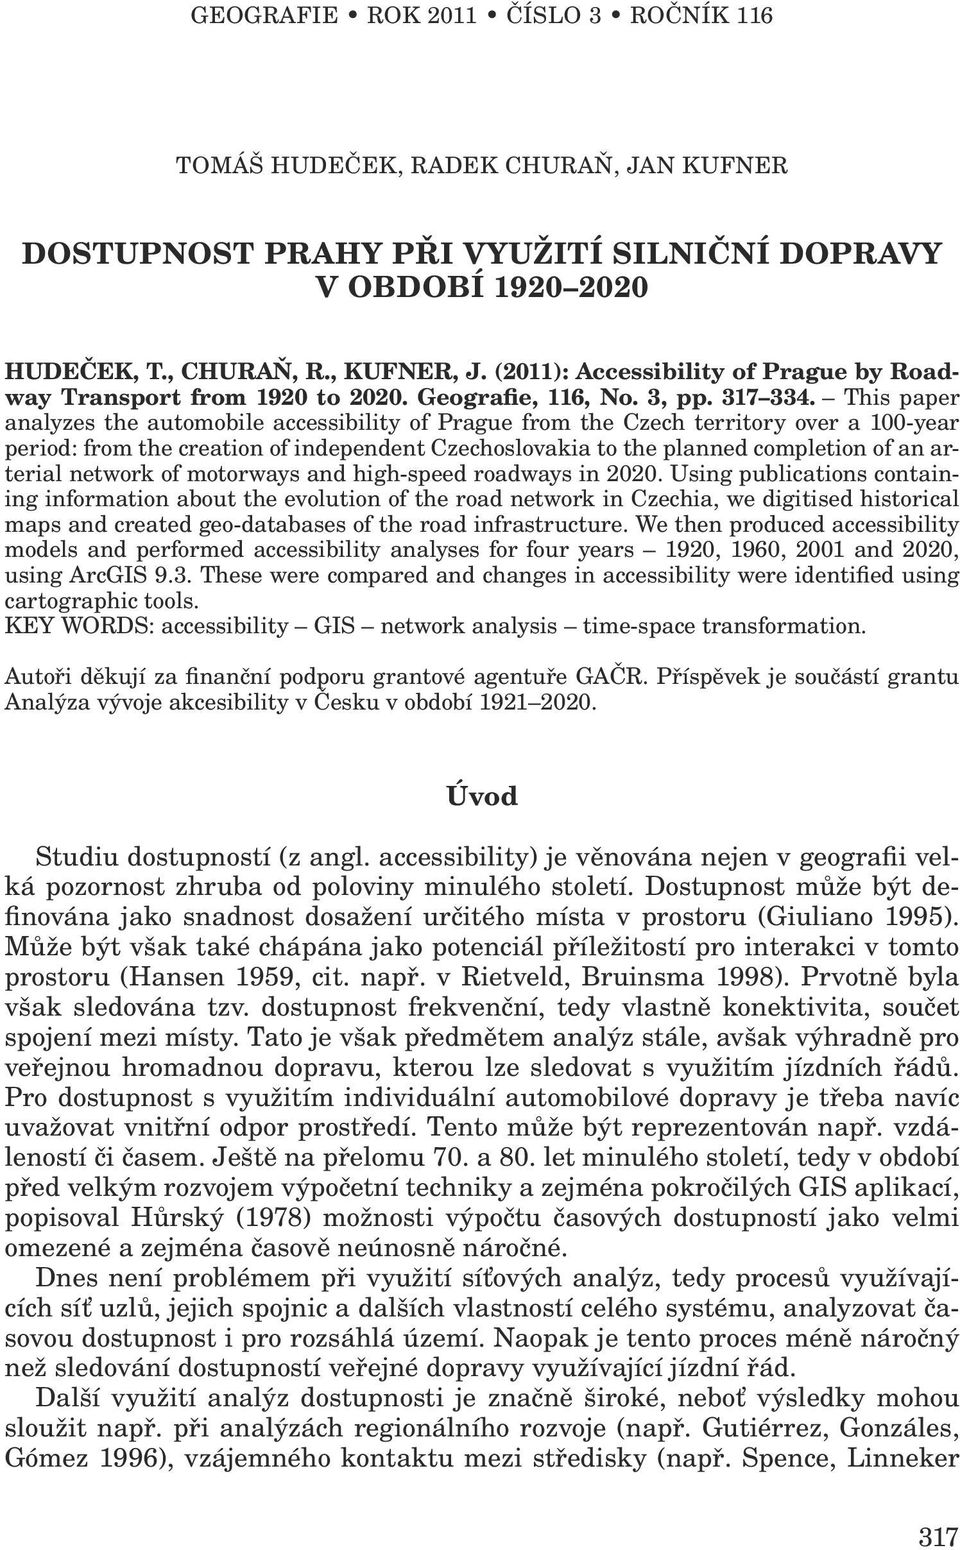 This paper analyzes the automobile accessibility of Prague from the Czech territory over a 100-year period: from the creation of independent Czechoslovakia to the planned completion of an arterial